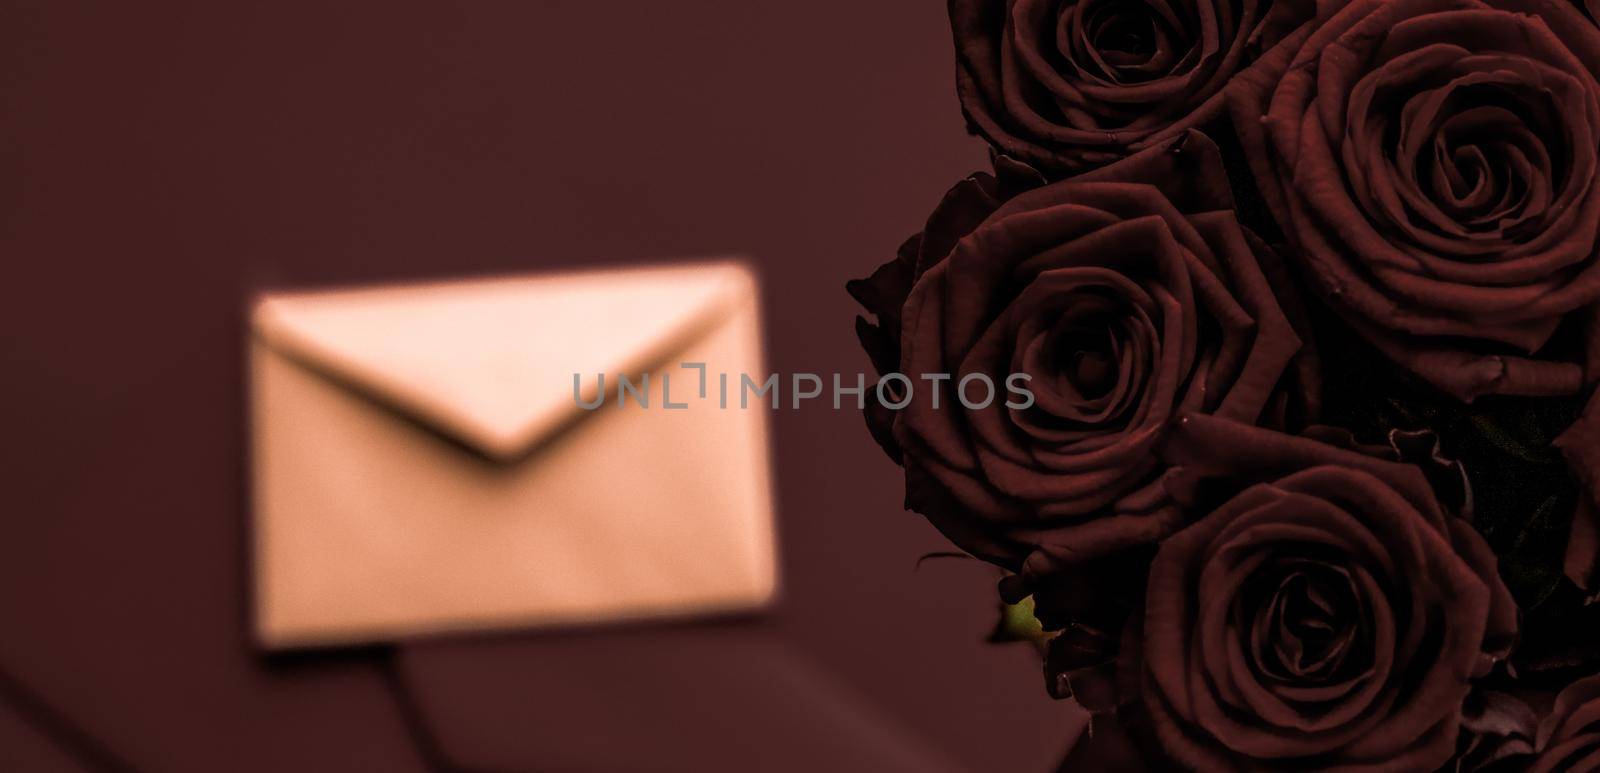 Love letter and flowers delivery on Valentines Day, luxury bouquet of roses and card on chocolate background for romantic holiday design by Anneleven